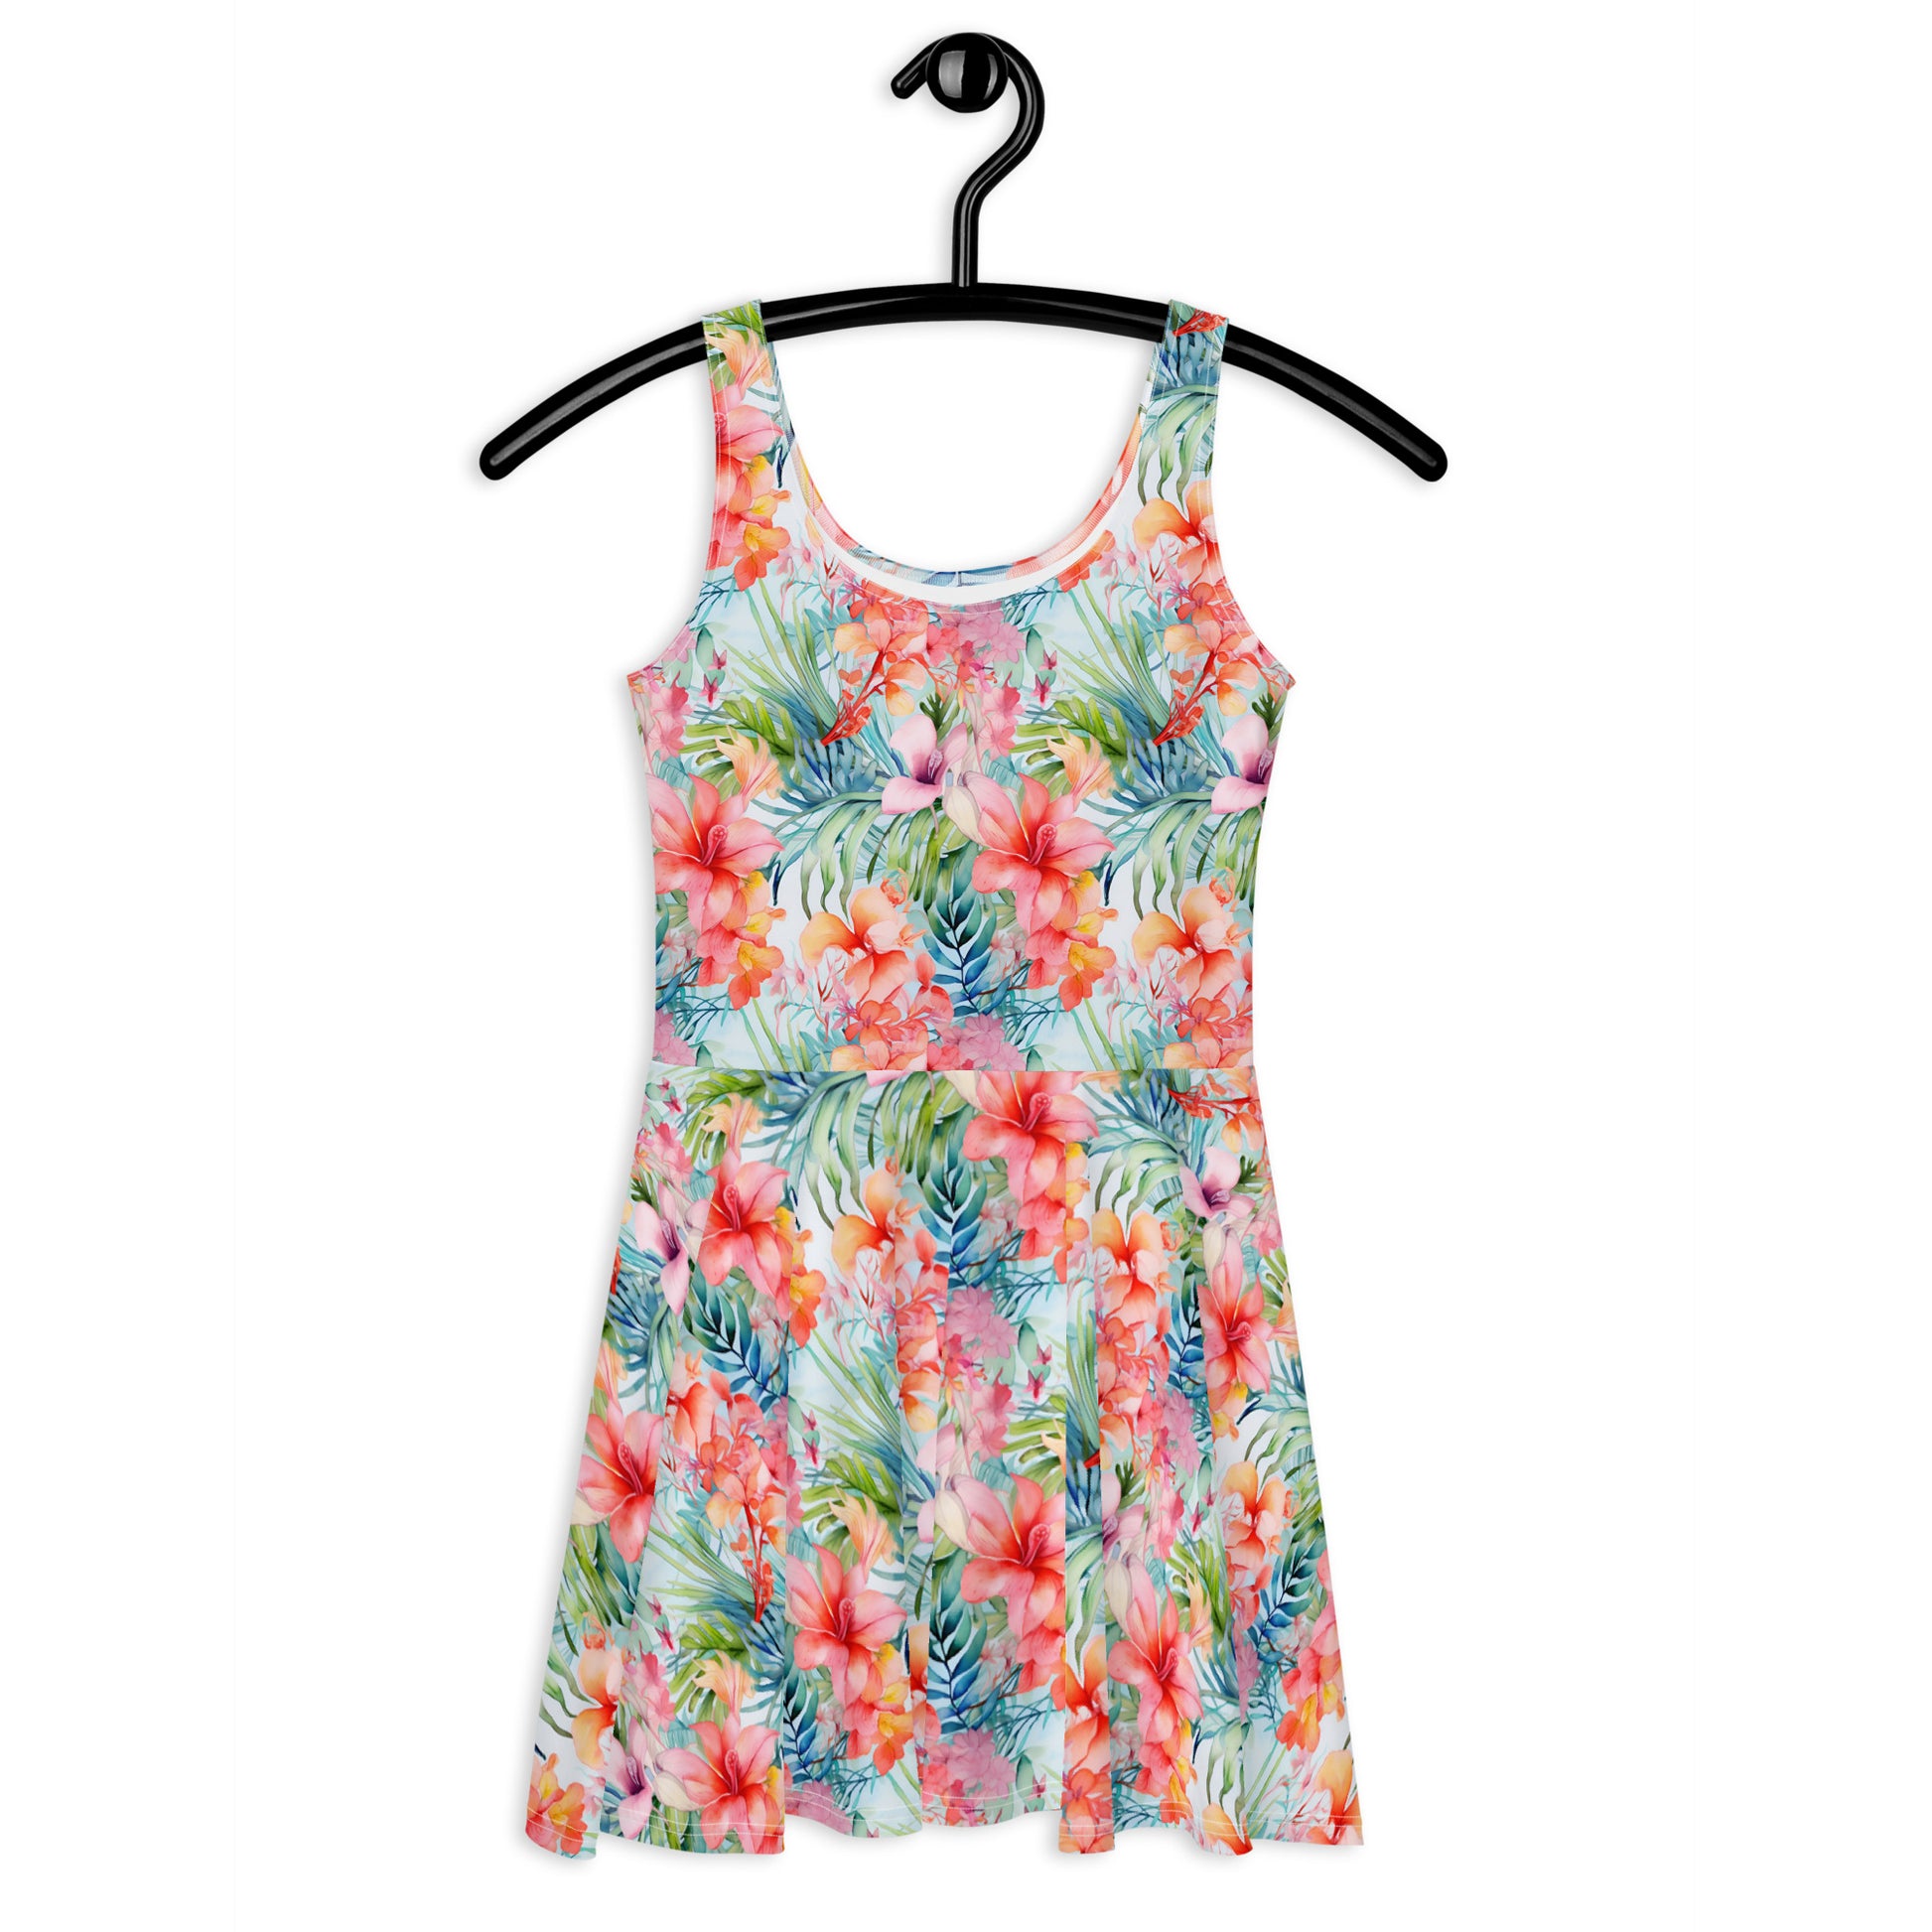 Tropical Skater Dress Women, Pink Flowers Floral Print Summer Sleeveless Mini Short Cute Ladies Vacation Cocktail Party Sexy Casual Attire Starcove Fashion